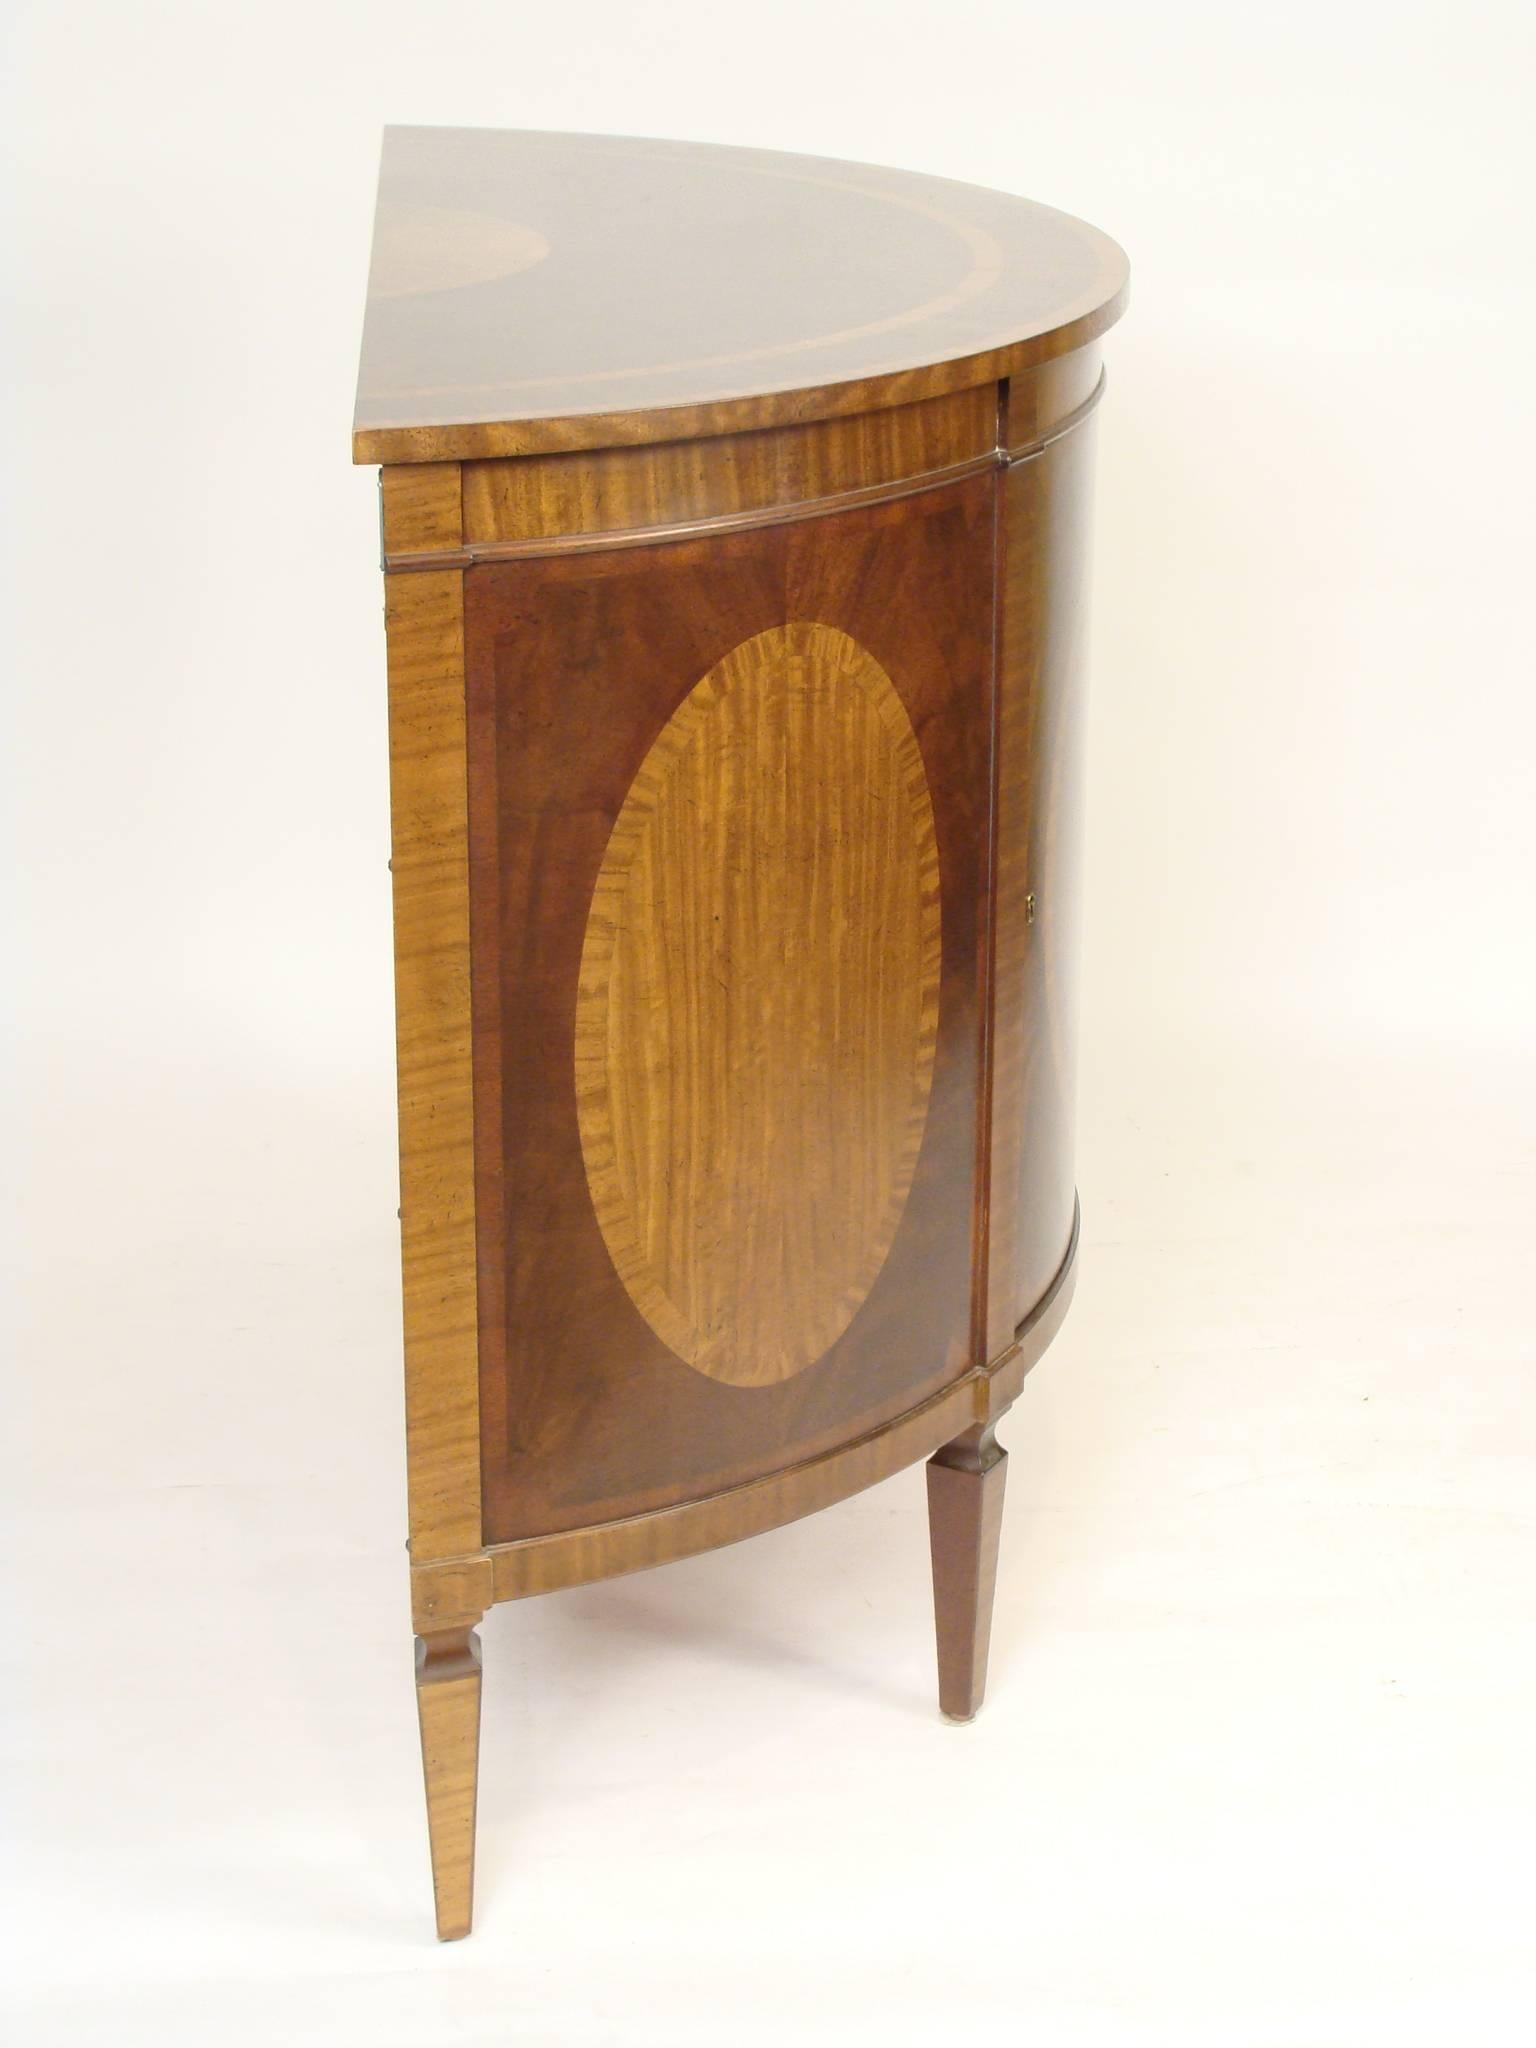 Barbara Barry for Baker English neoclassical style mahogany demilune cabinet with satinwood inlay, circa 1990.